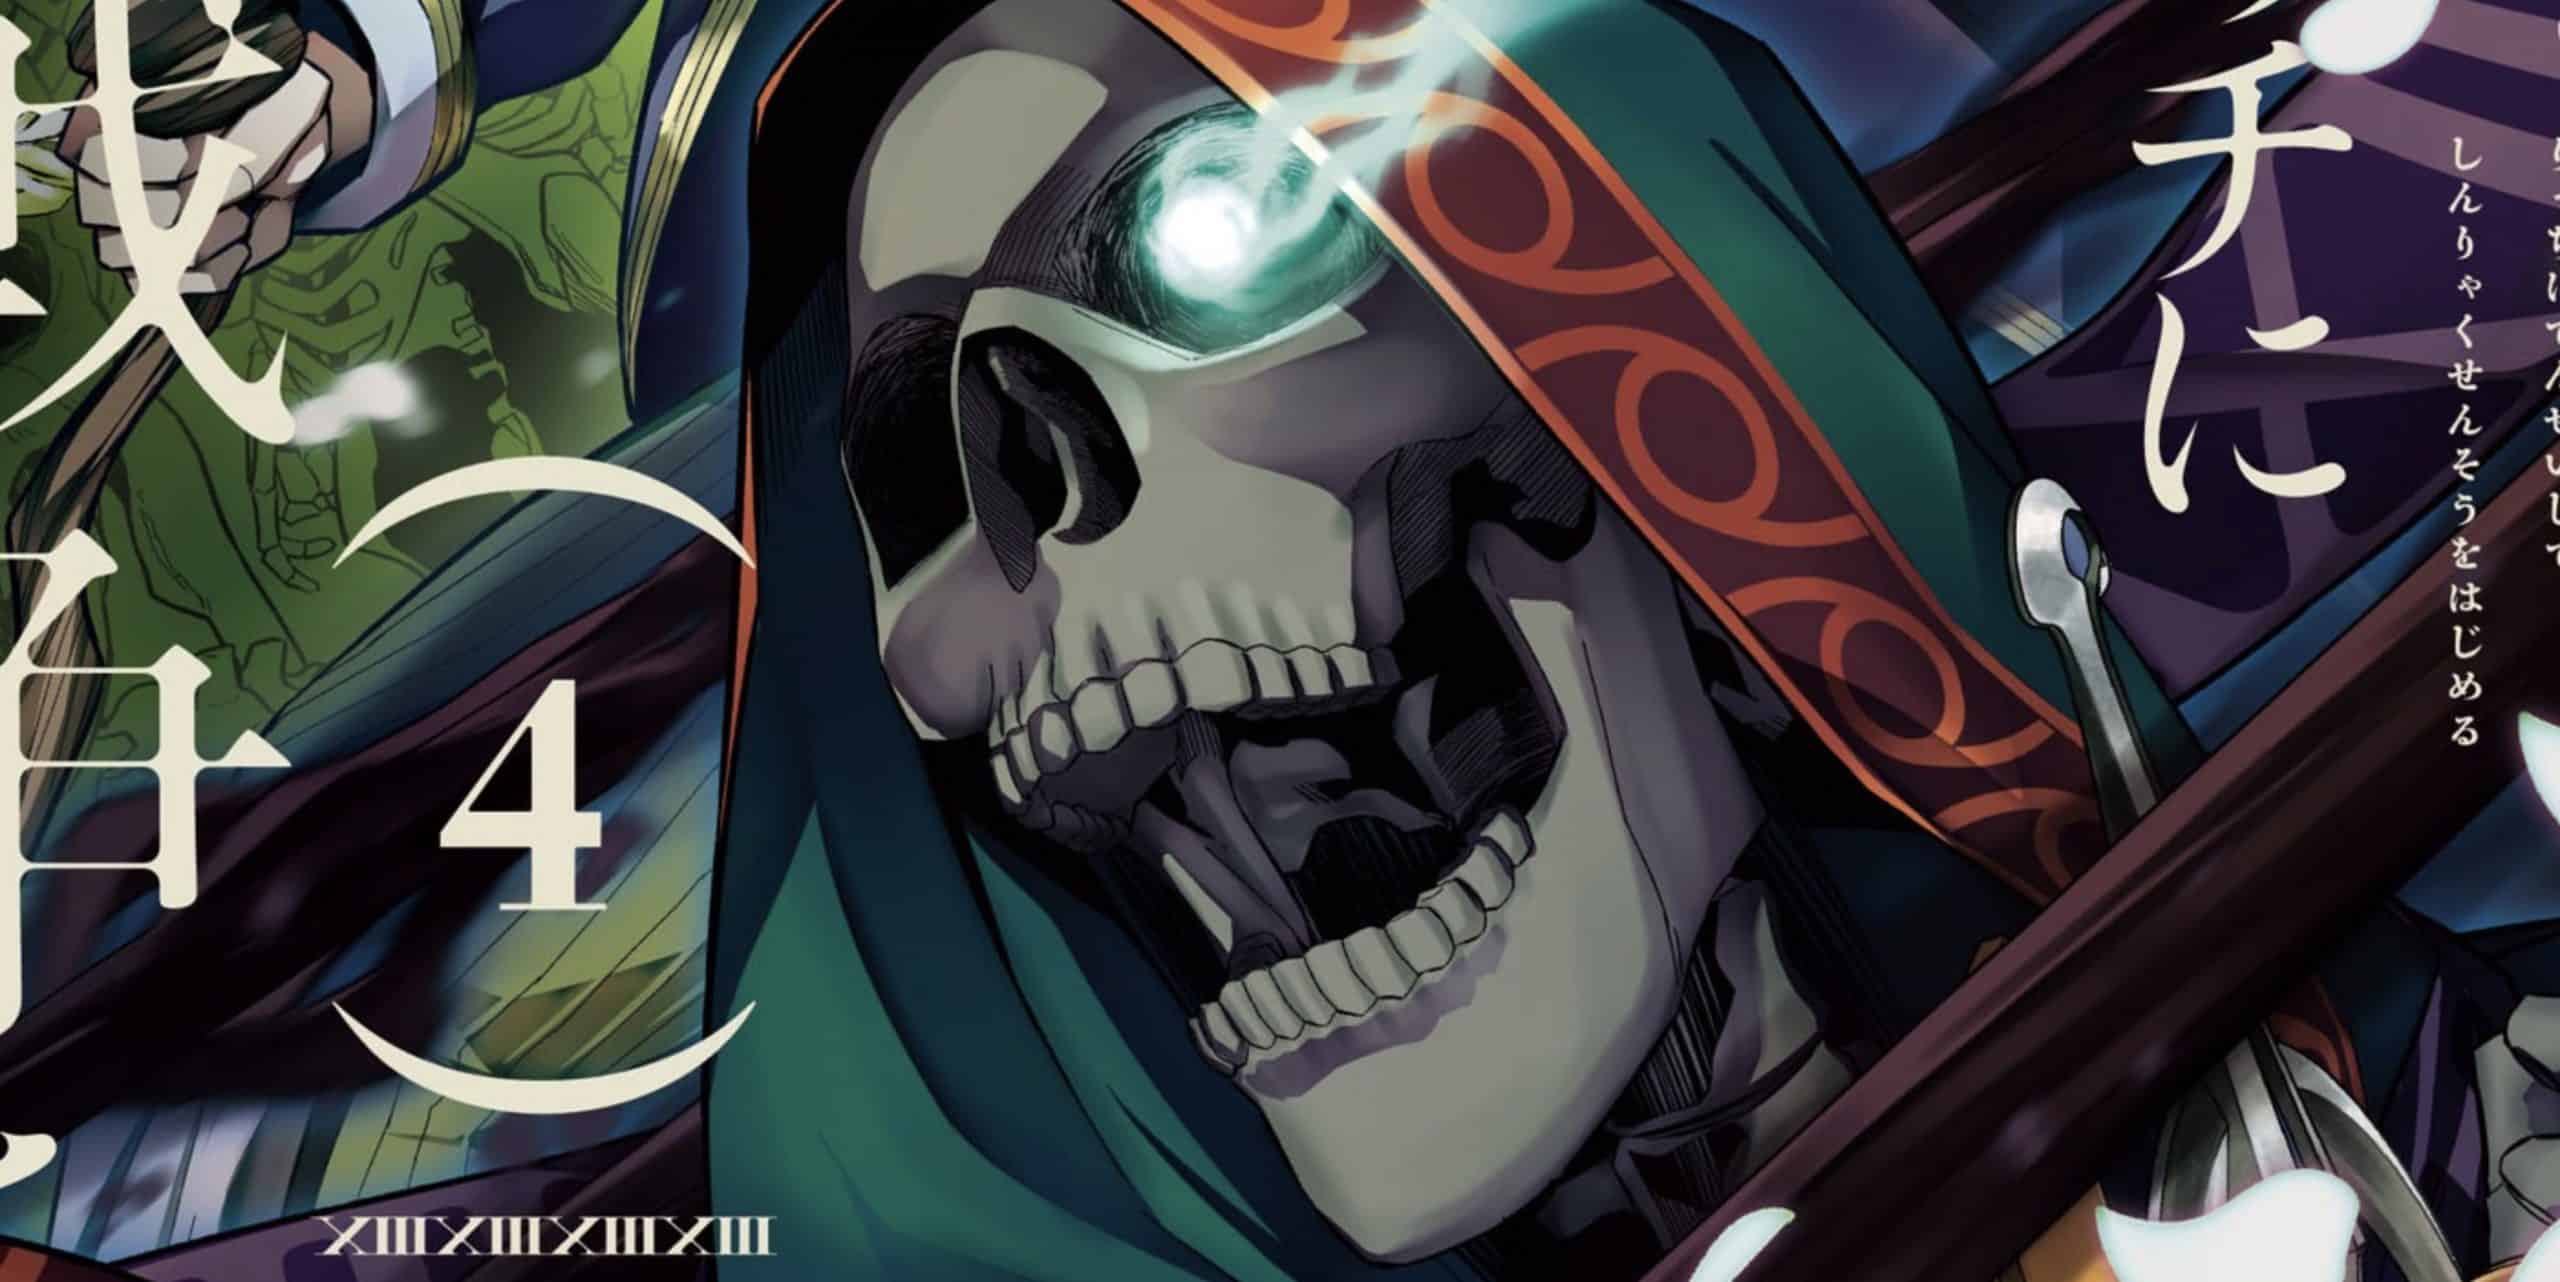 The Executed Sage Is Reincarnated as a Lich and Starts an All-Out War Chapter 35 release date